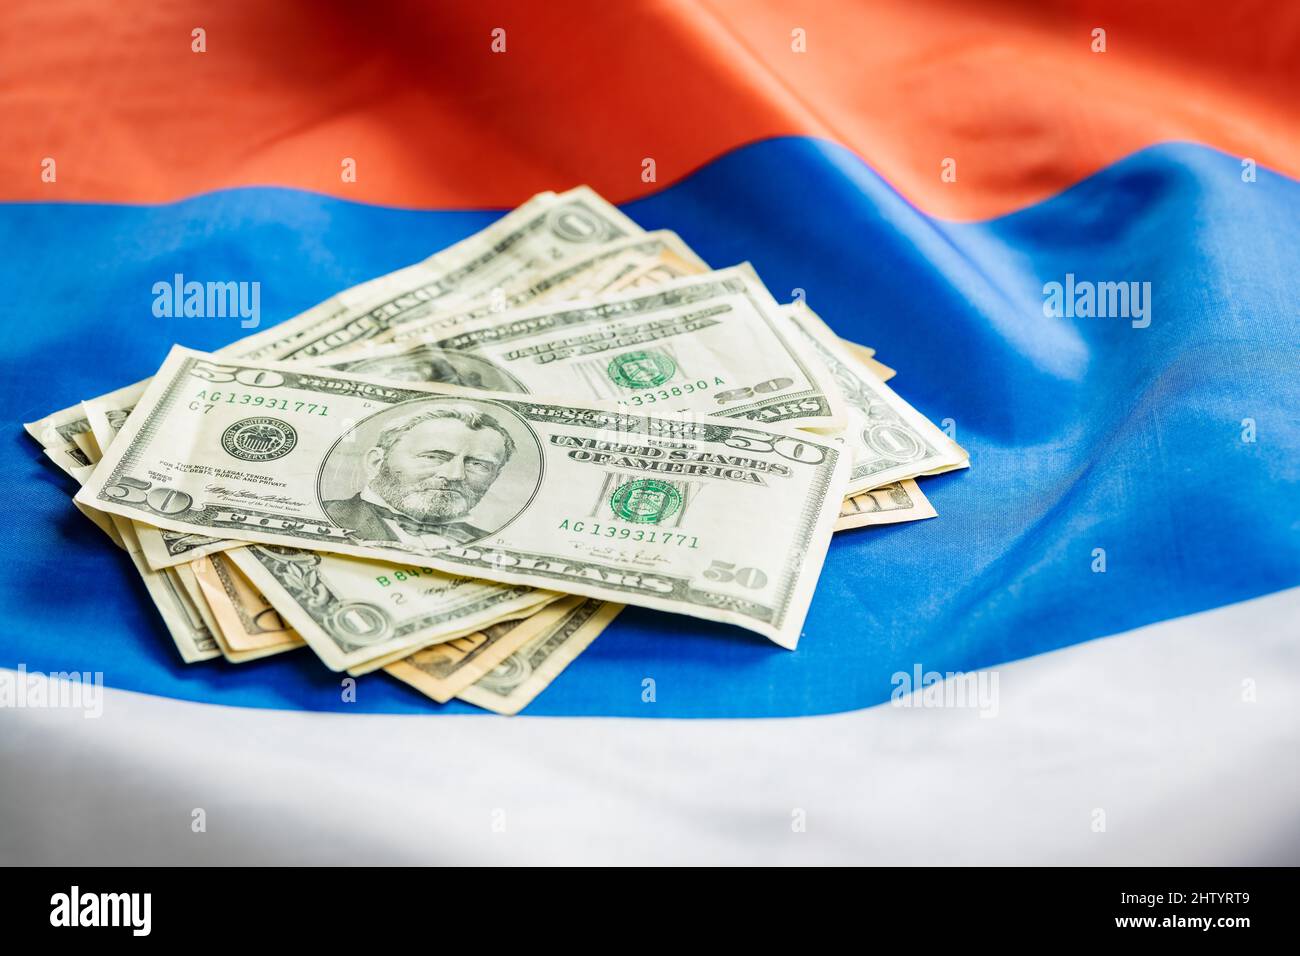 US dollar banknotes laid on the Russian flag. Stock Photo